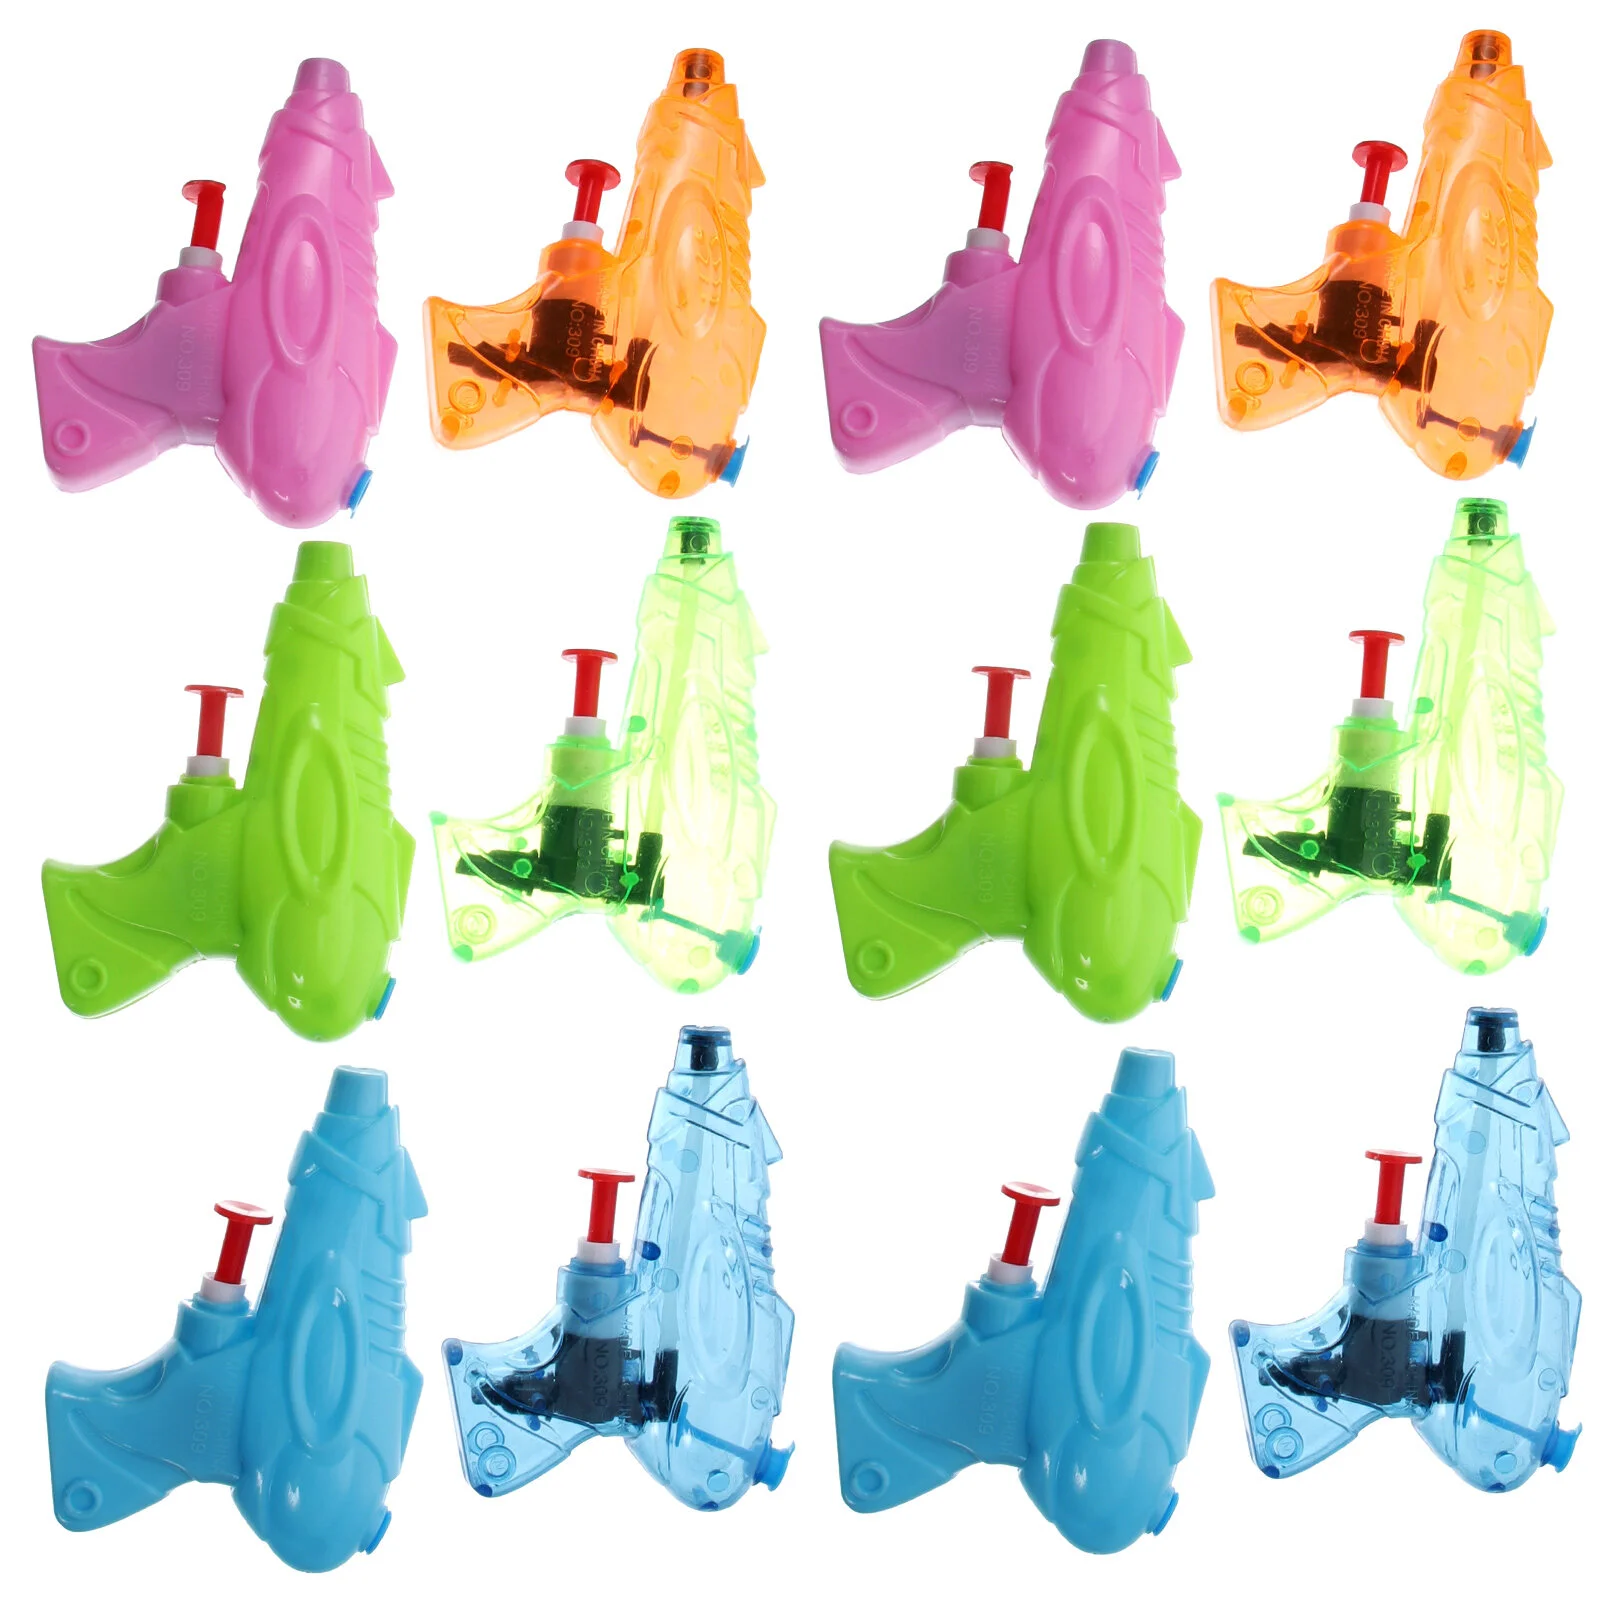 

12pcs Water Toys Water Shooter Toys Kids Beach Toys Kids Plaything (Random Color)